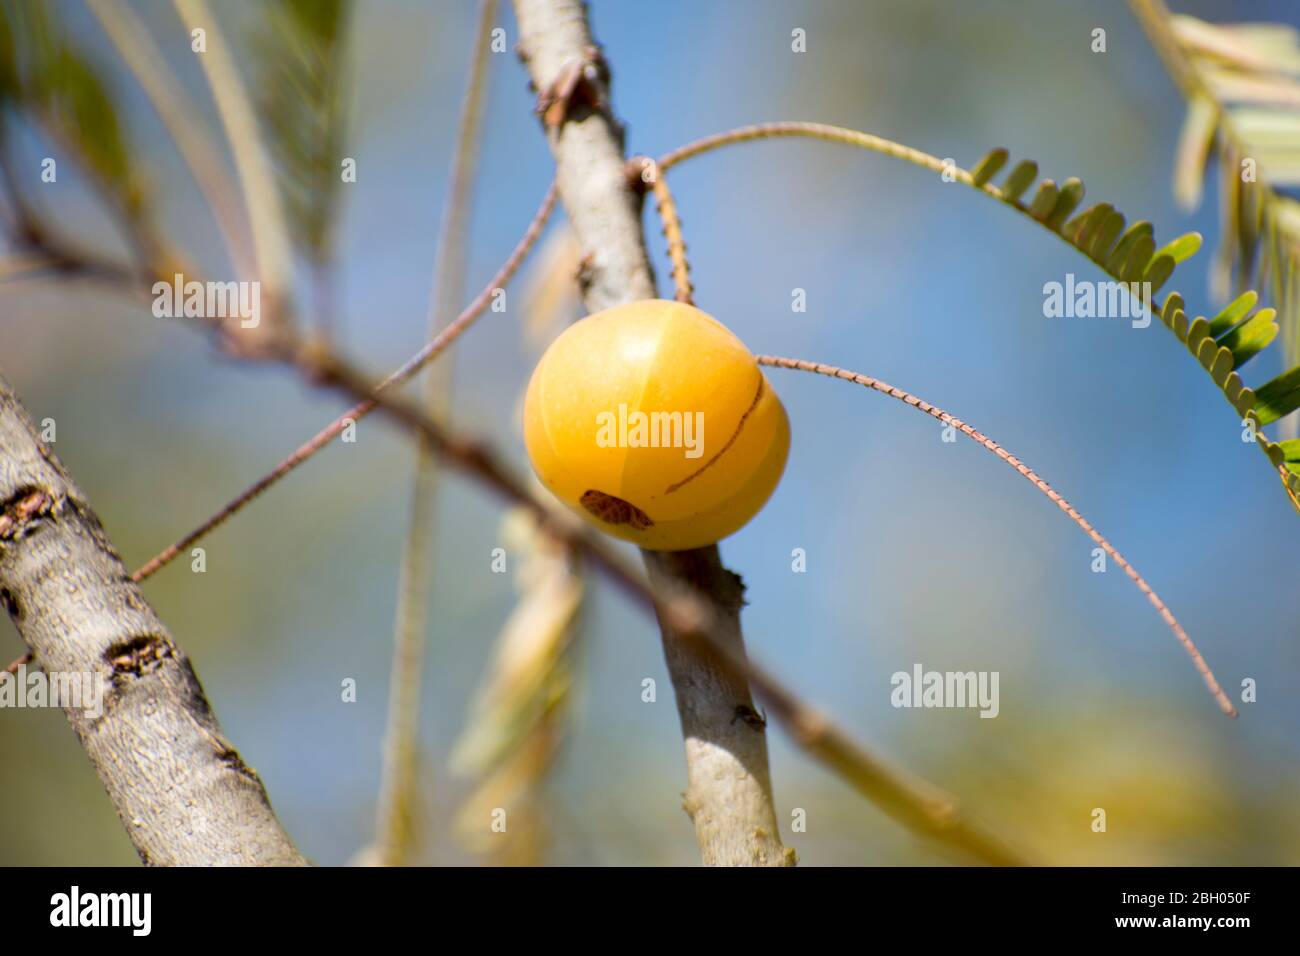 Indian gooseberry, Phyllanthus emblica, also called amla. An essential ingredient of traditional Indian Ayurvedic medicines Stock Photo